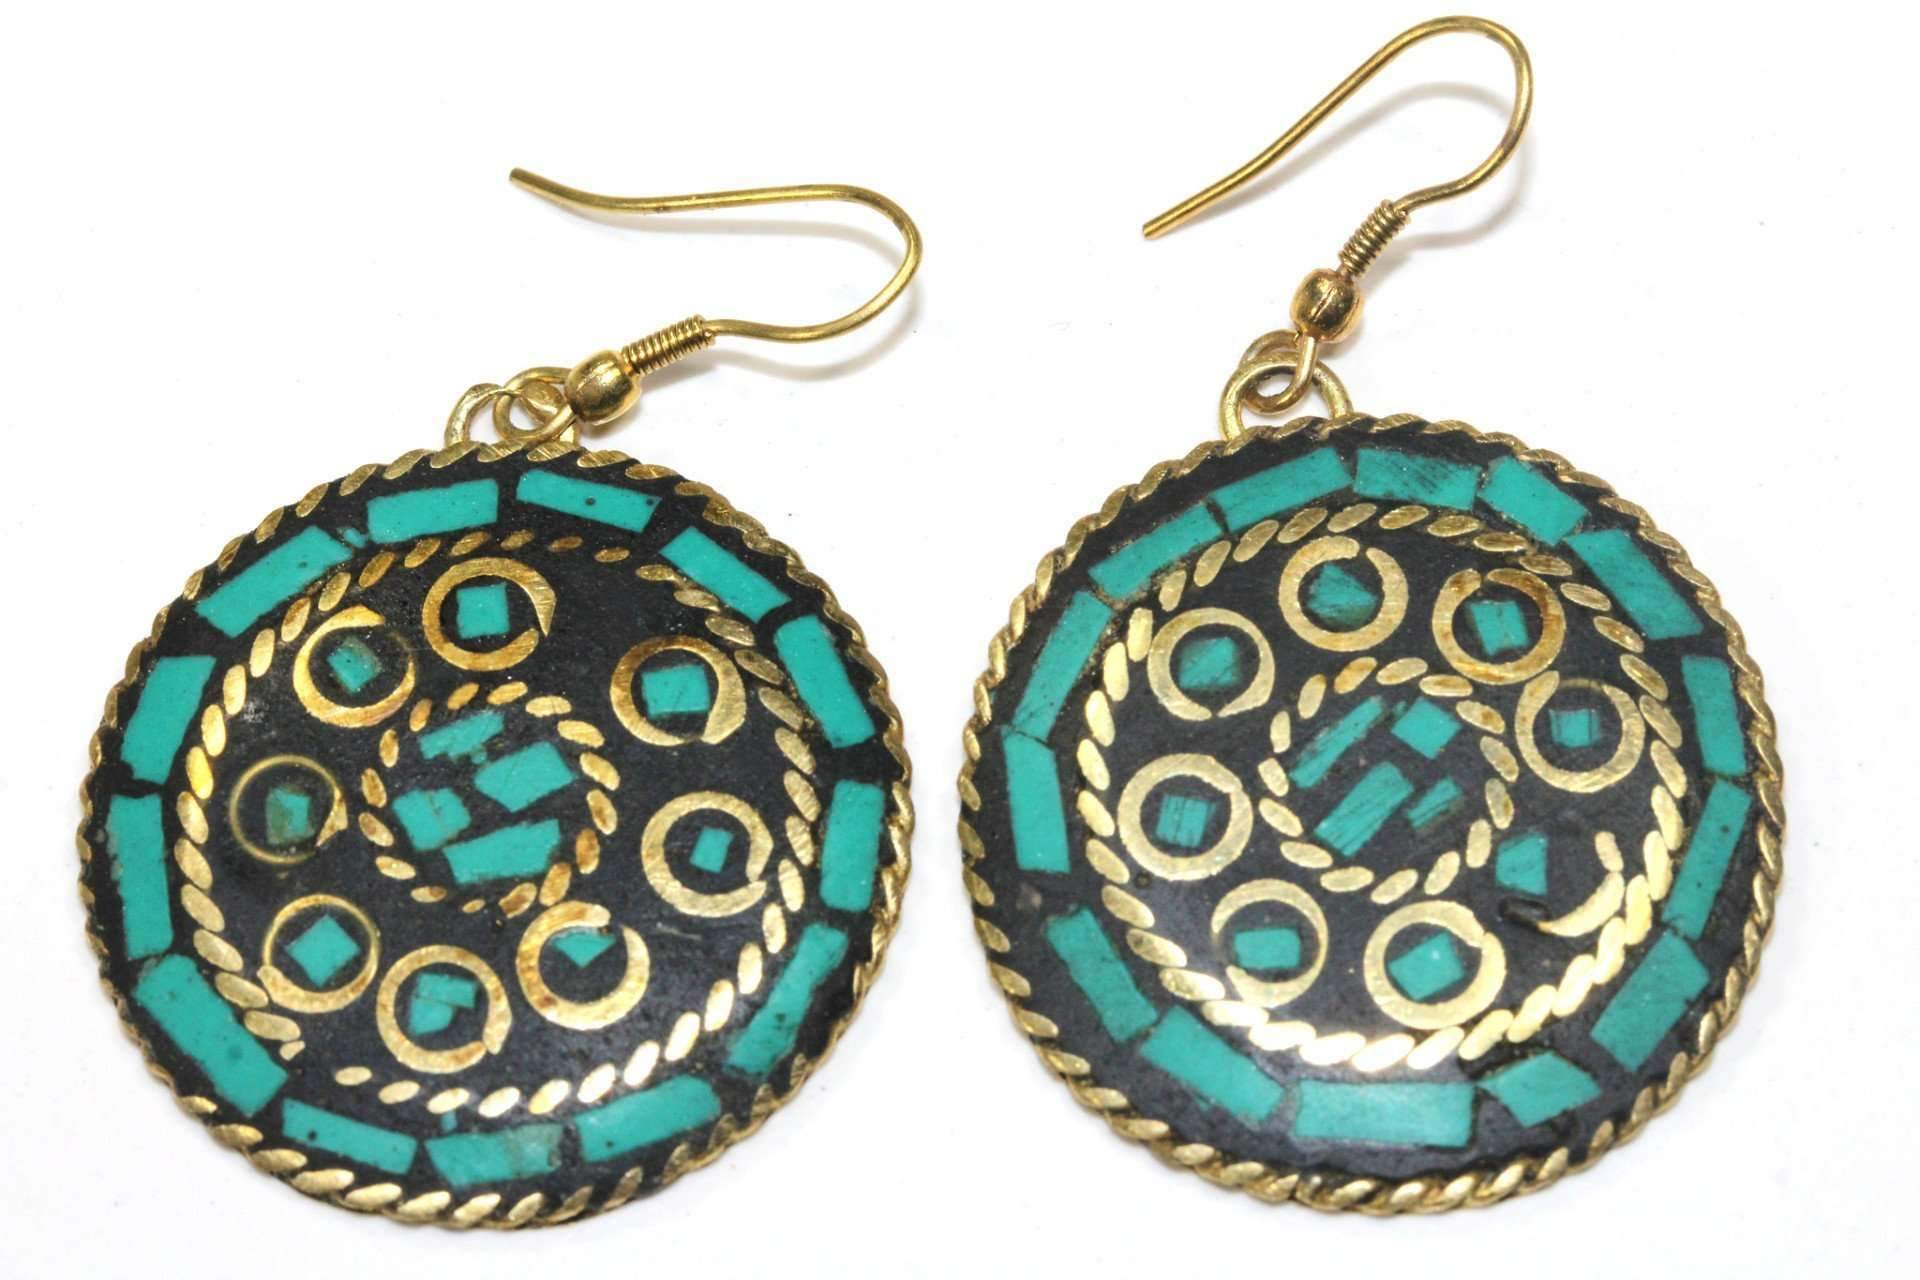 A pair of Mosaic Round Earrings with gold accents, displayed on a white background.